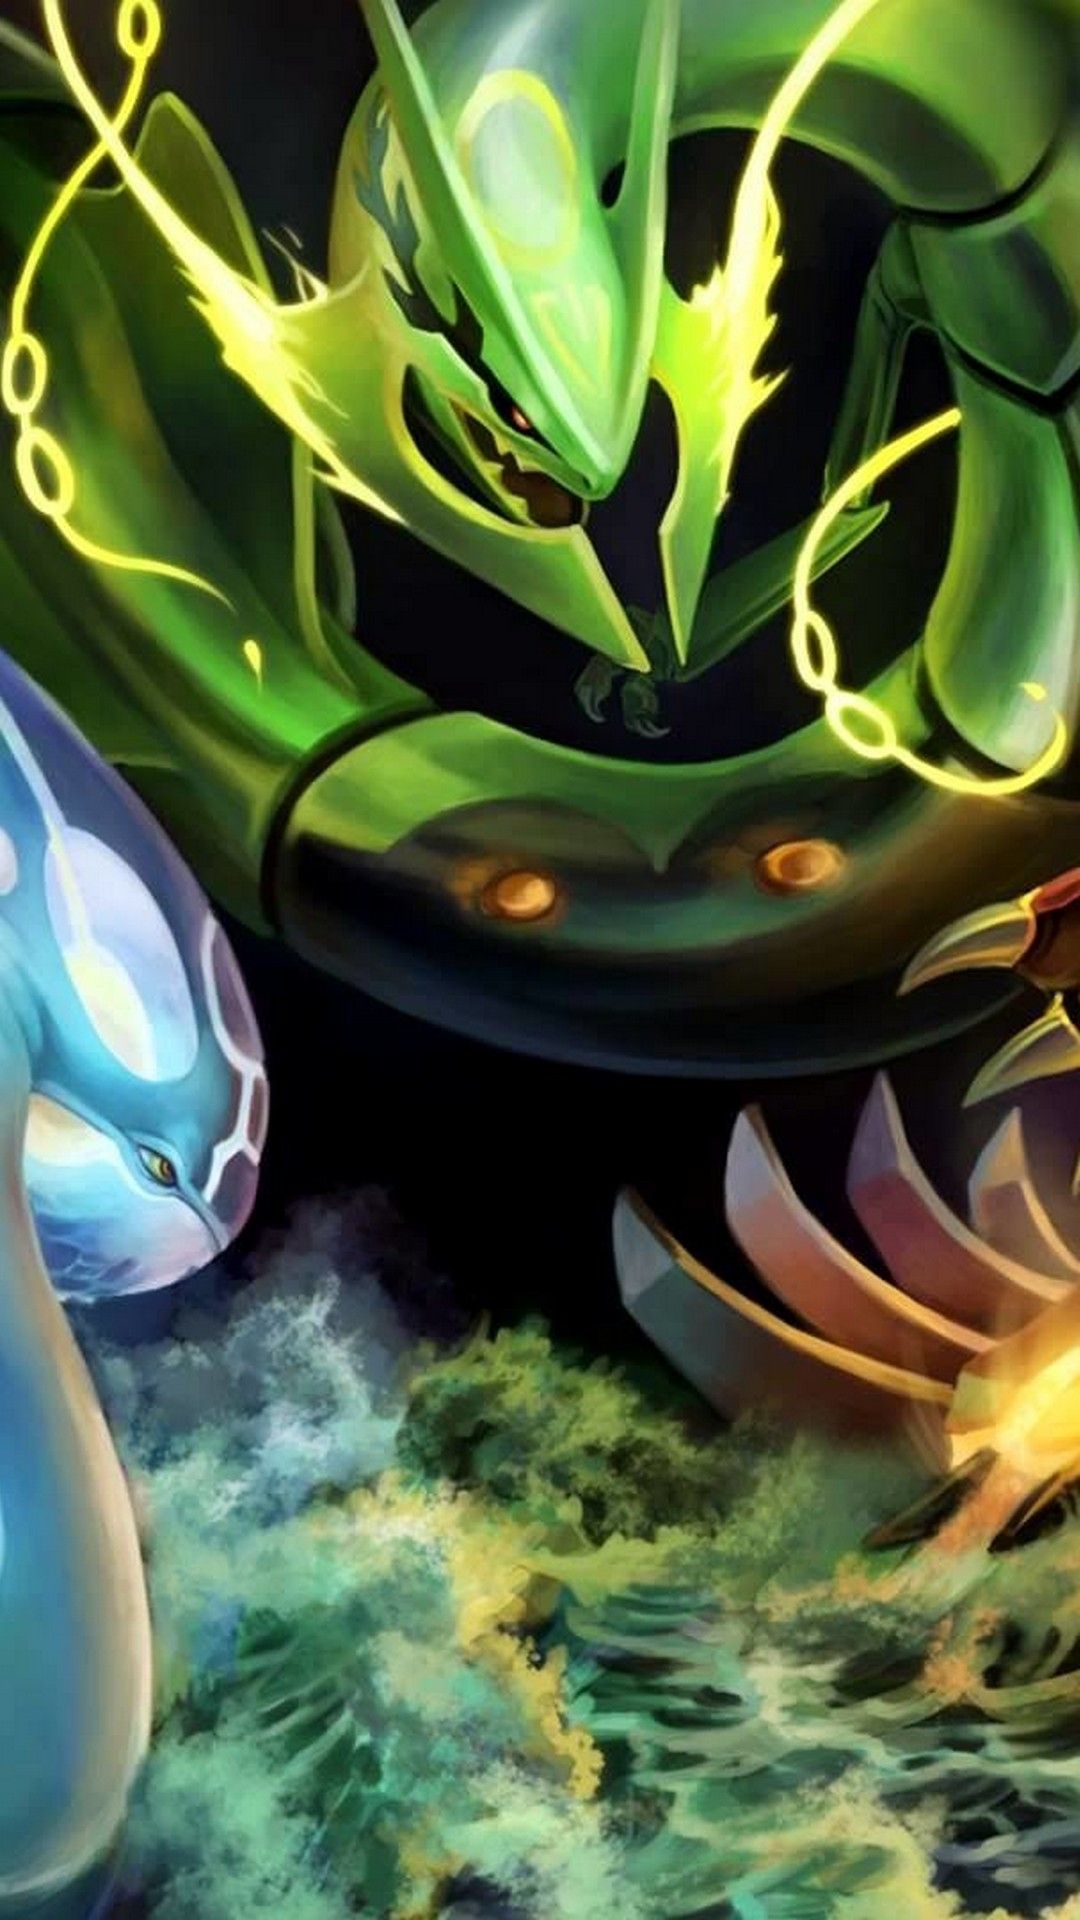 Pokemon Rayquaza Groudon And Kyogre, Download Wallpaper